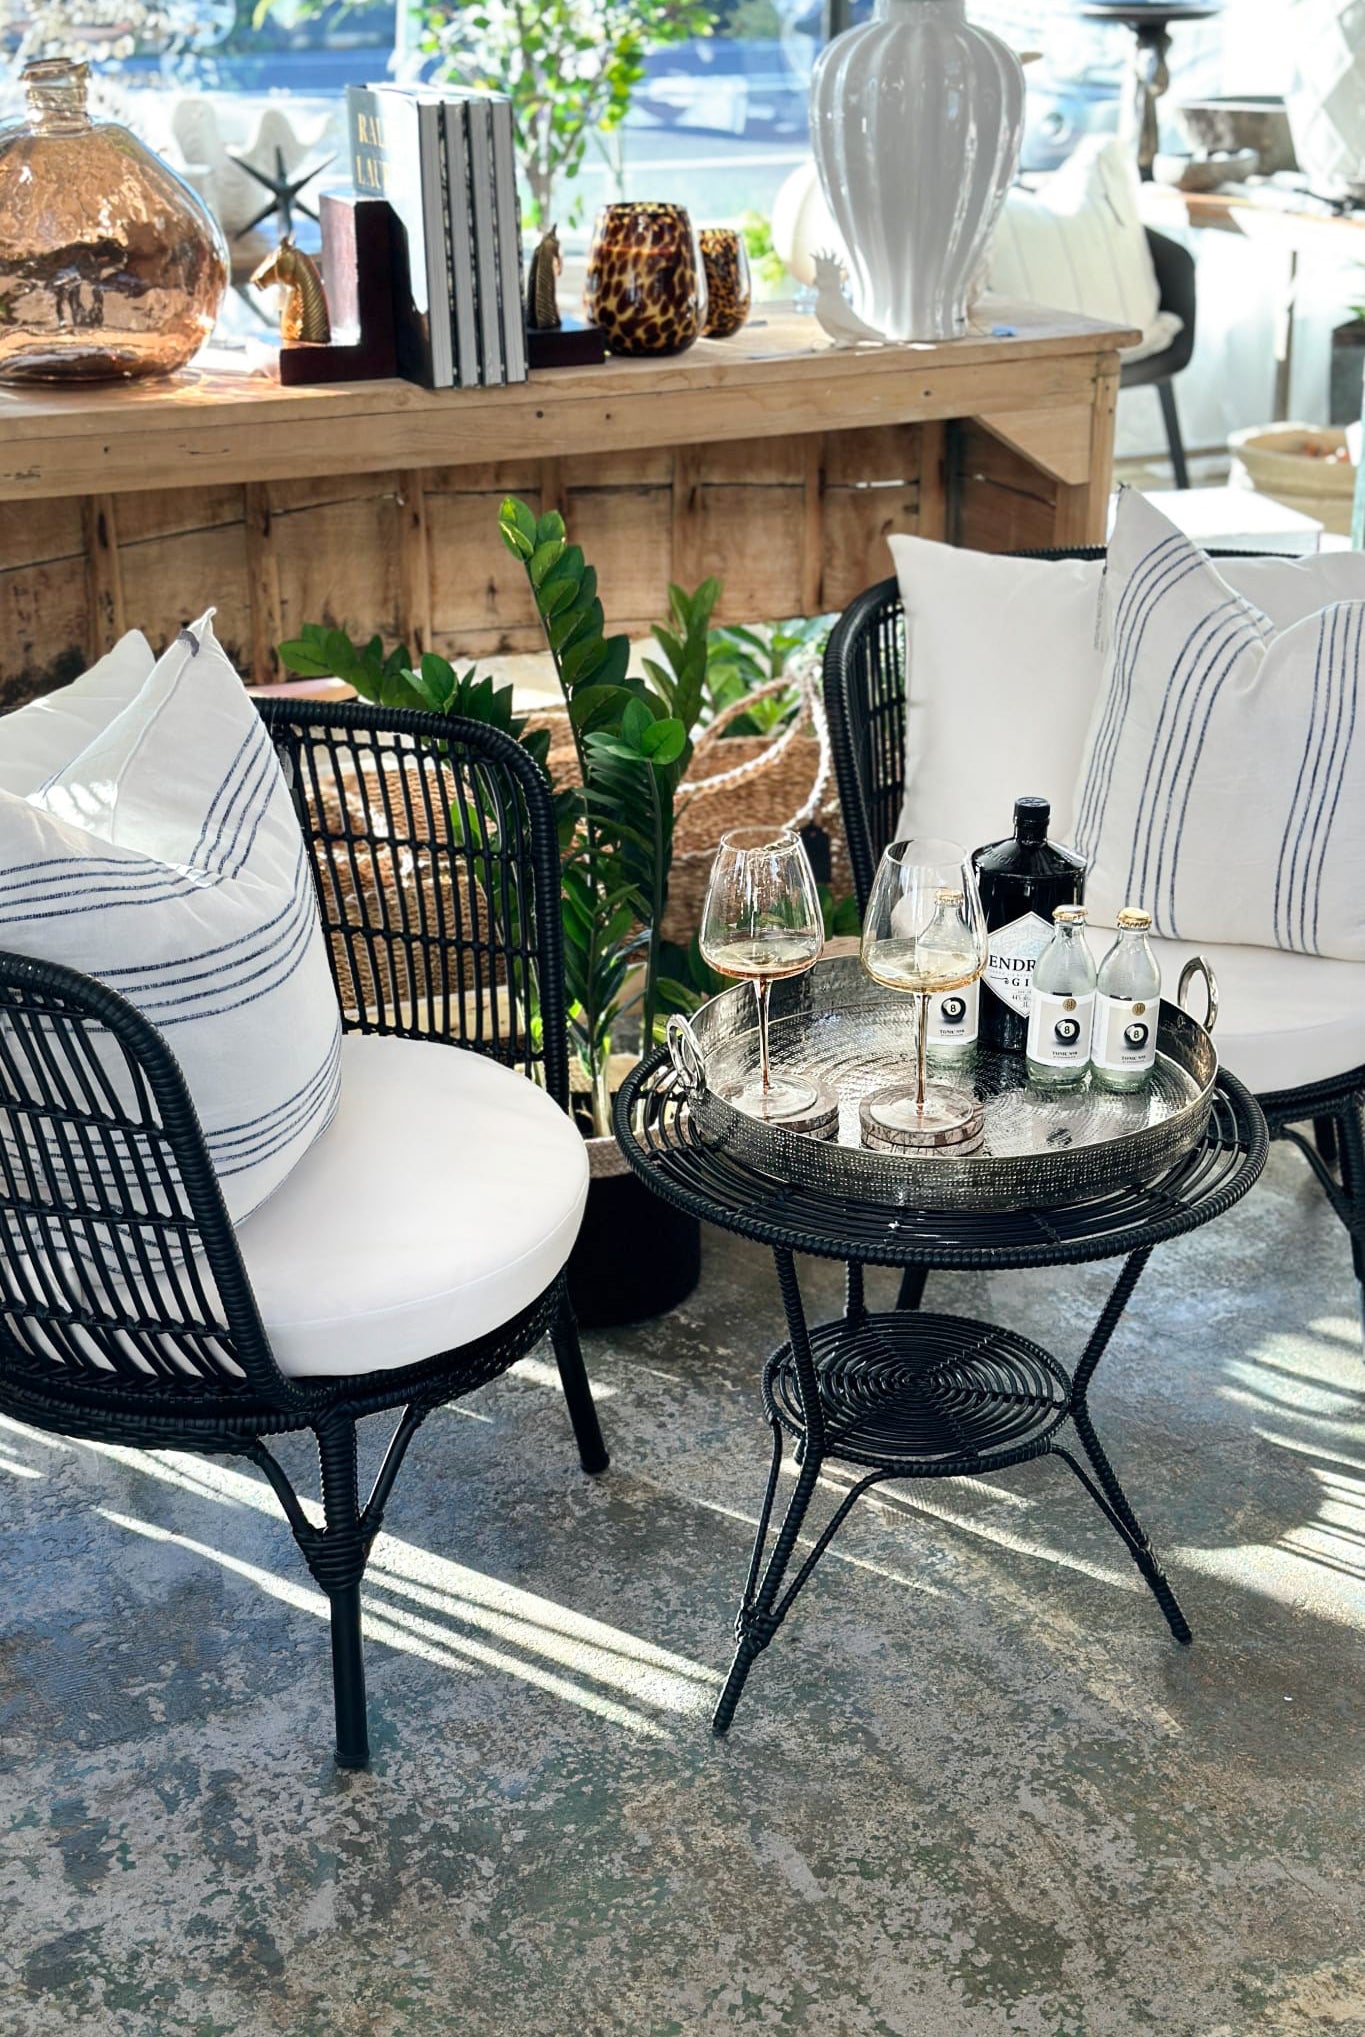 Clifton Outdoor 3 Piece Setting - Black - Magpie Style